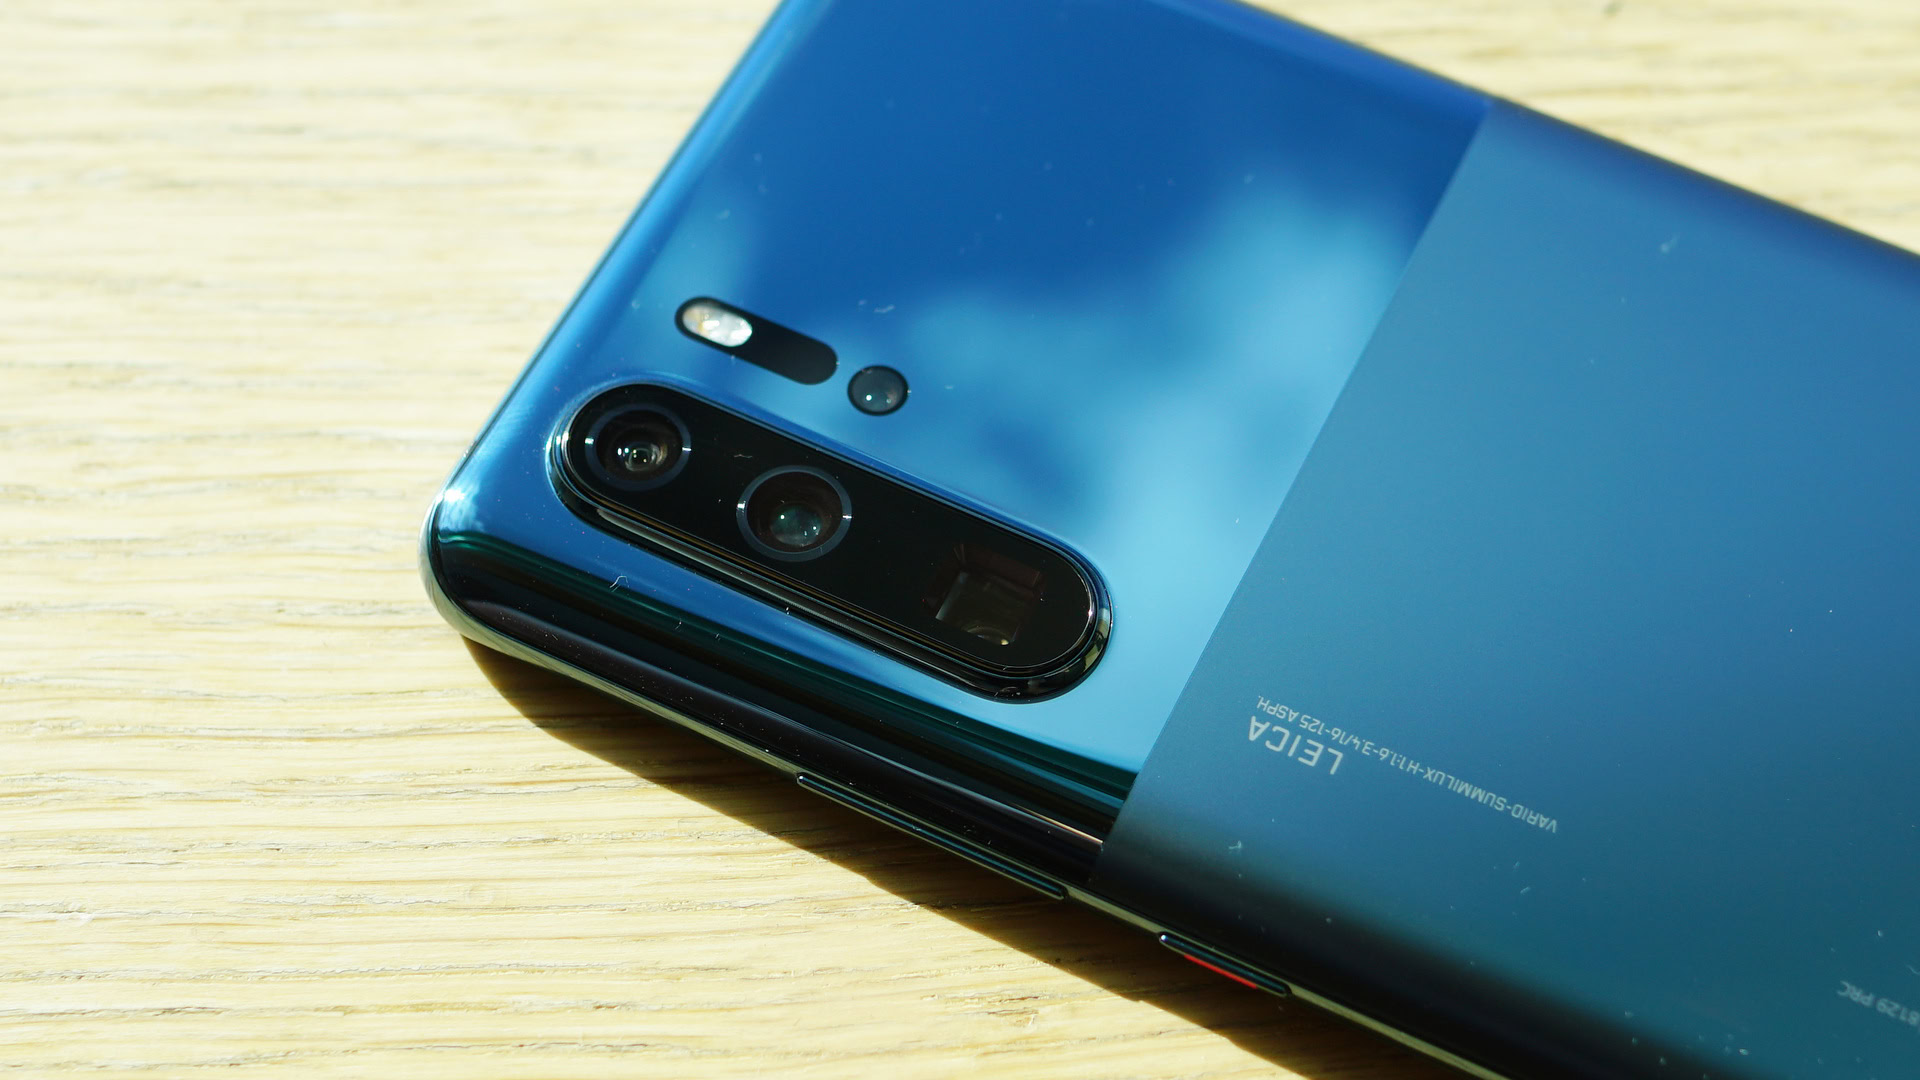 Huawei P30 Pro NEW EDITION to launch on May 15, will come with GMS - Huawei  Central